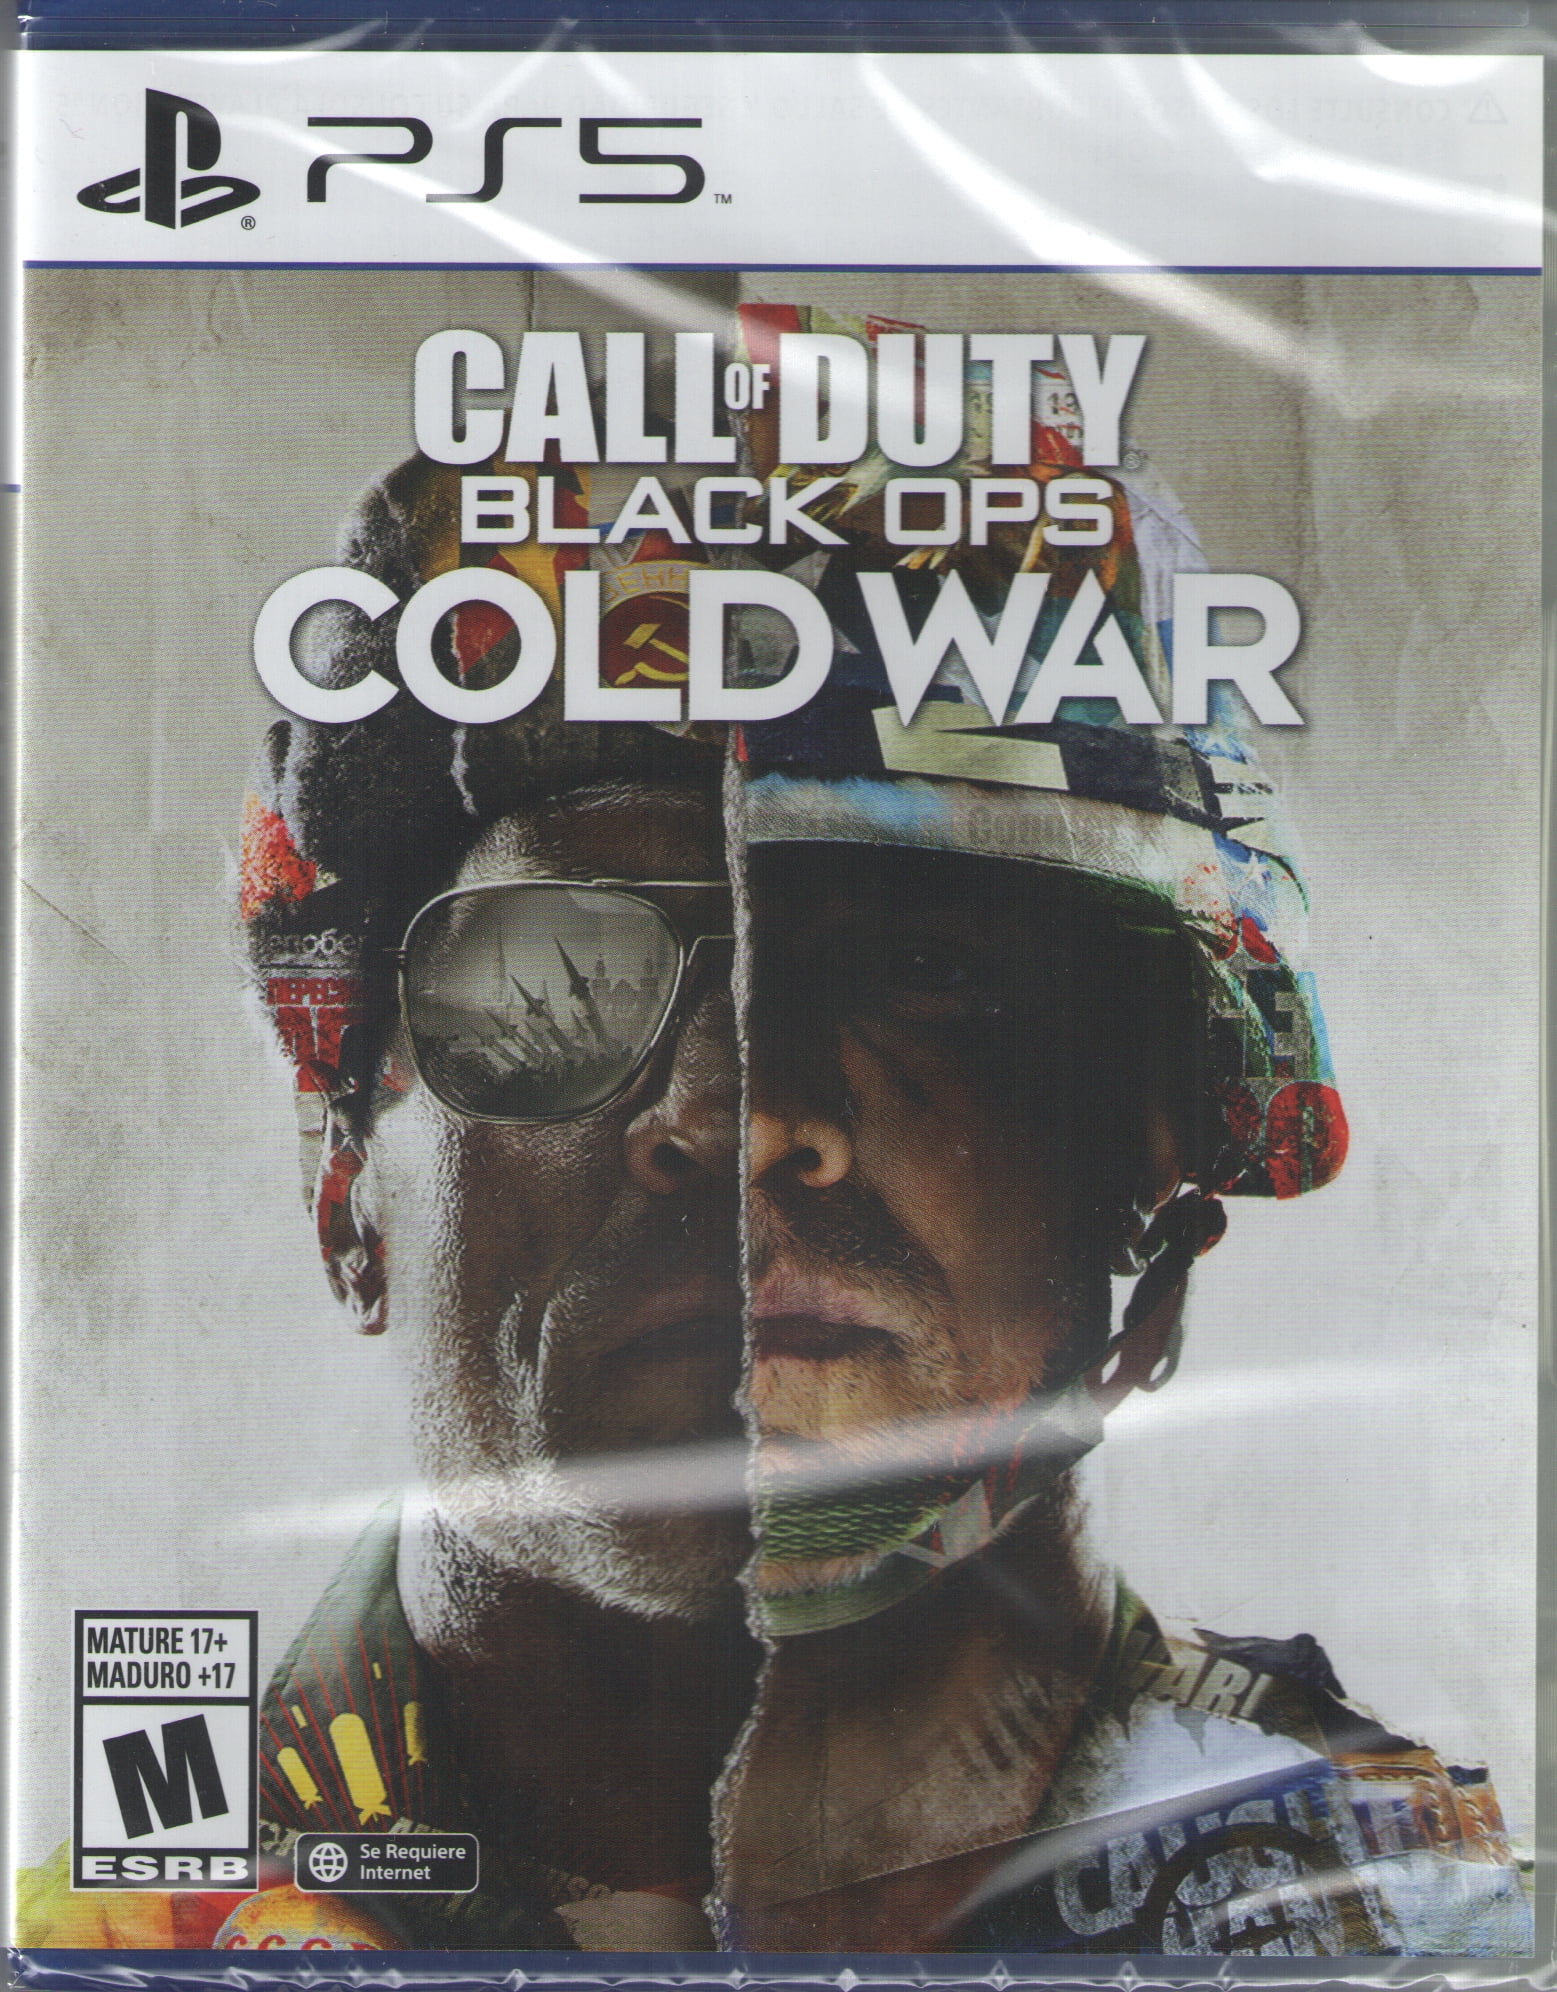 PS5 Call of Duty Black Ops: Cold War - PlayStation 5